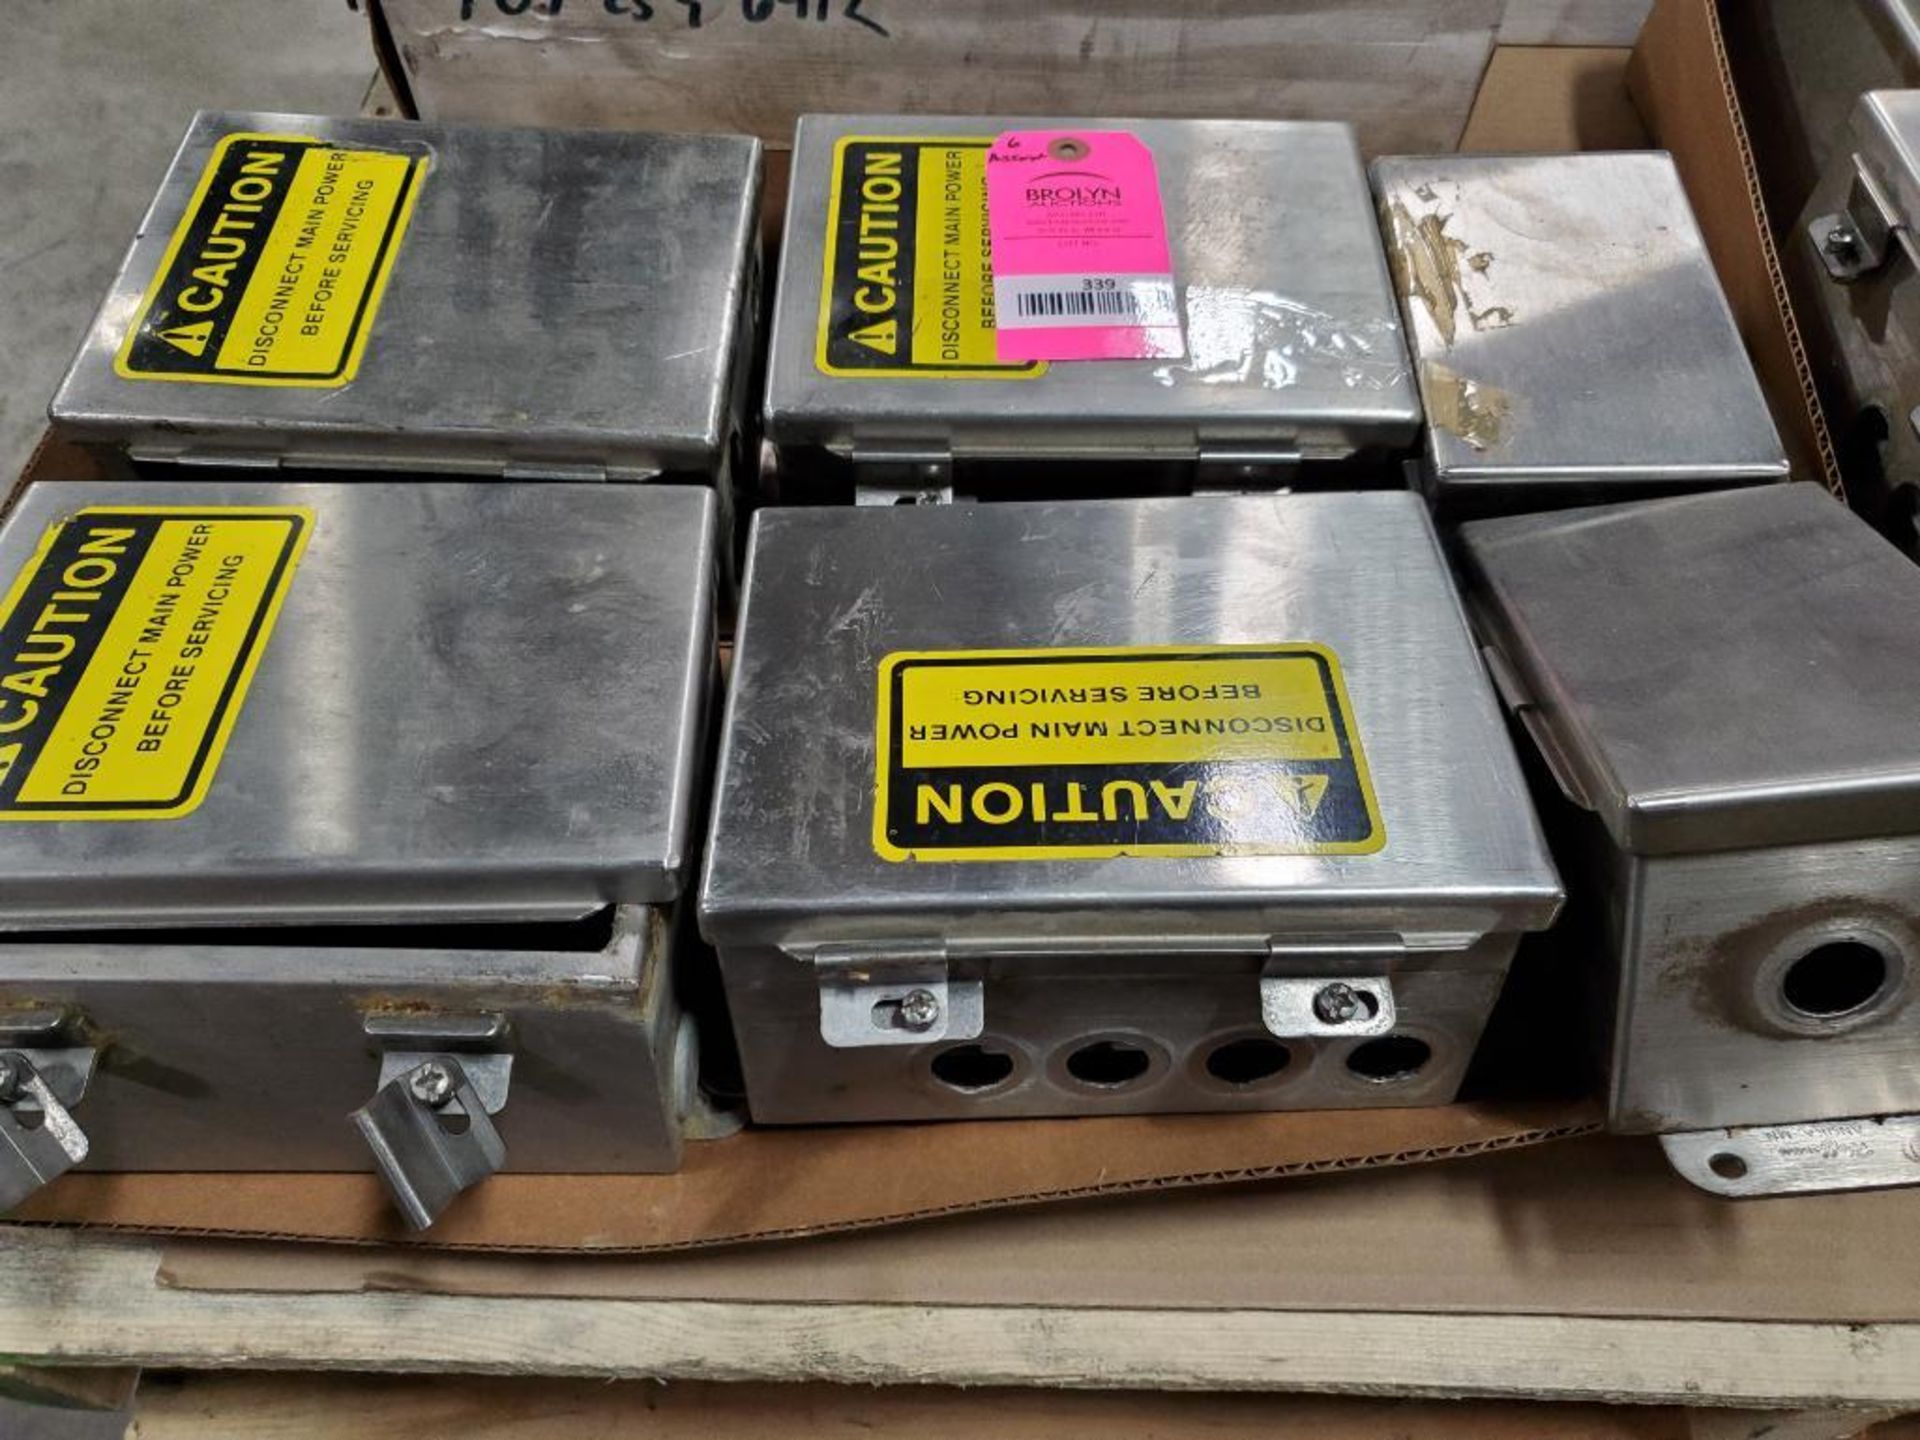 Qty 6 - Assorted stainless steel enclosure boxes. Hoffman. - Image 4 of 4